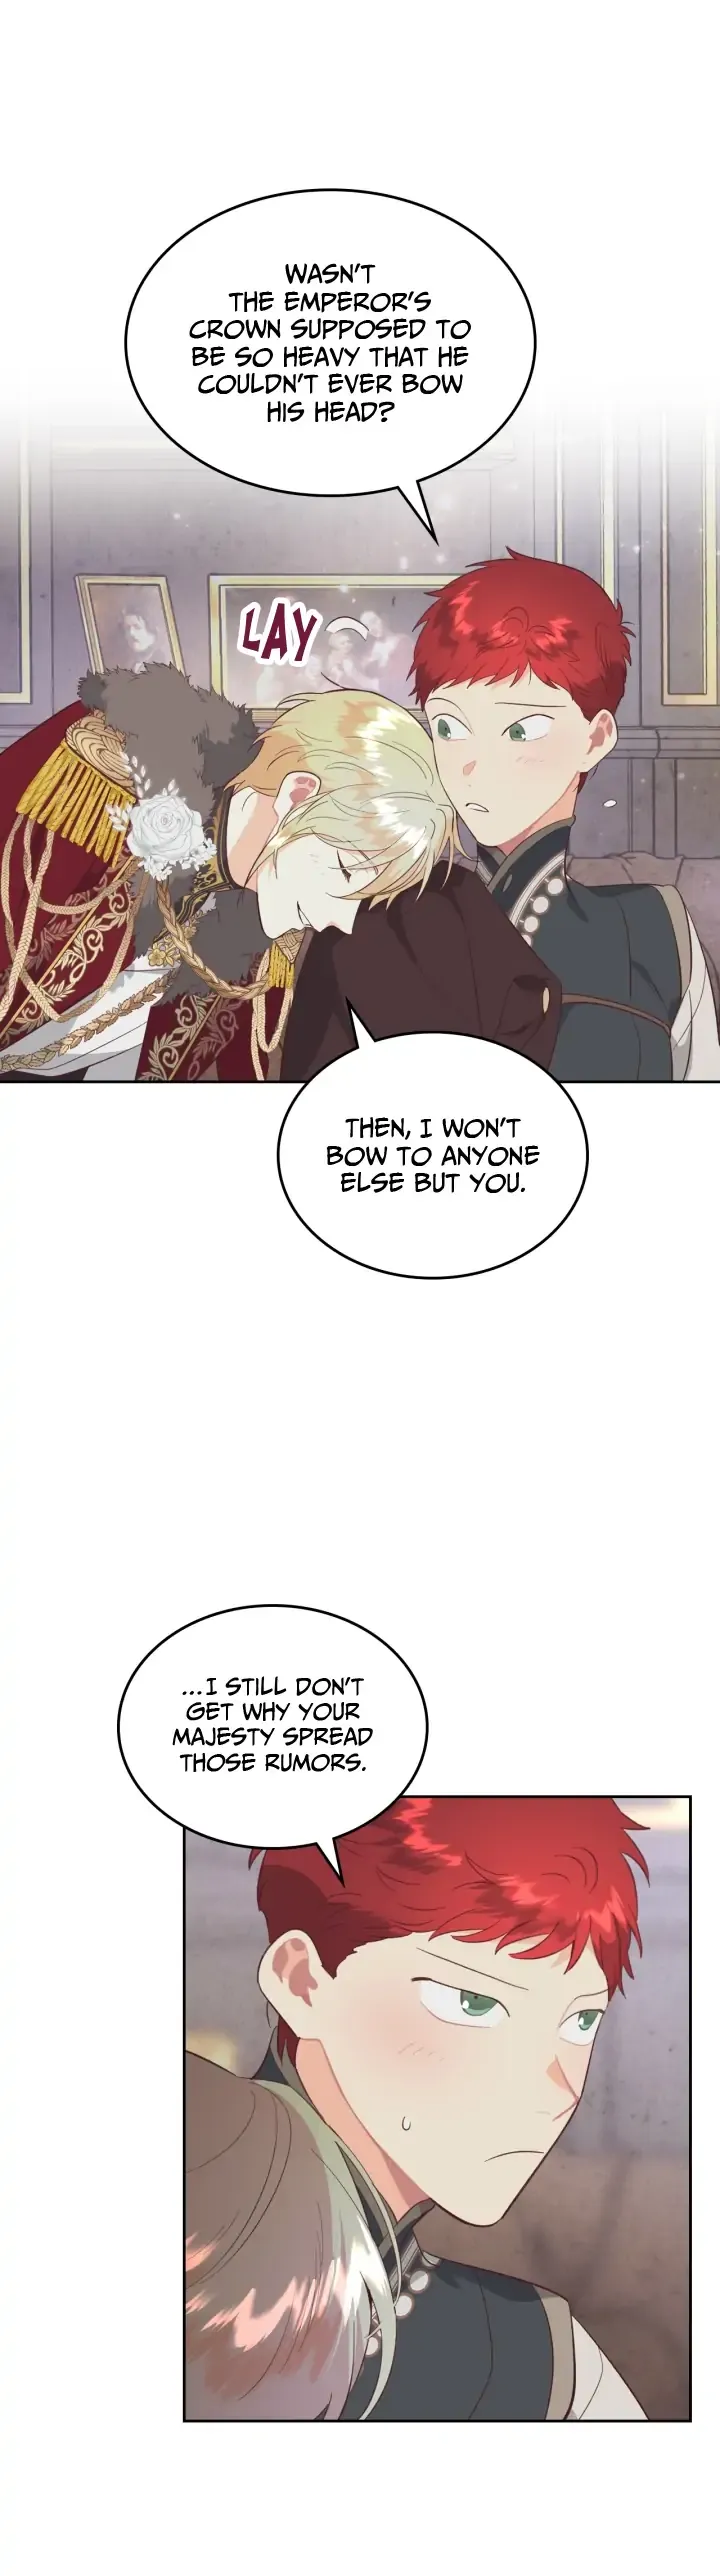 Emperor And The Female Knight (The King and His Knight) Chapter 169 page 27 - MangaWeebs.in